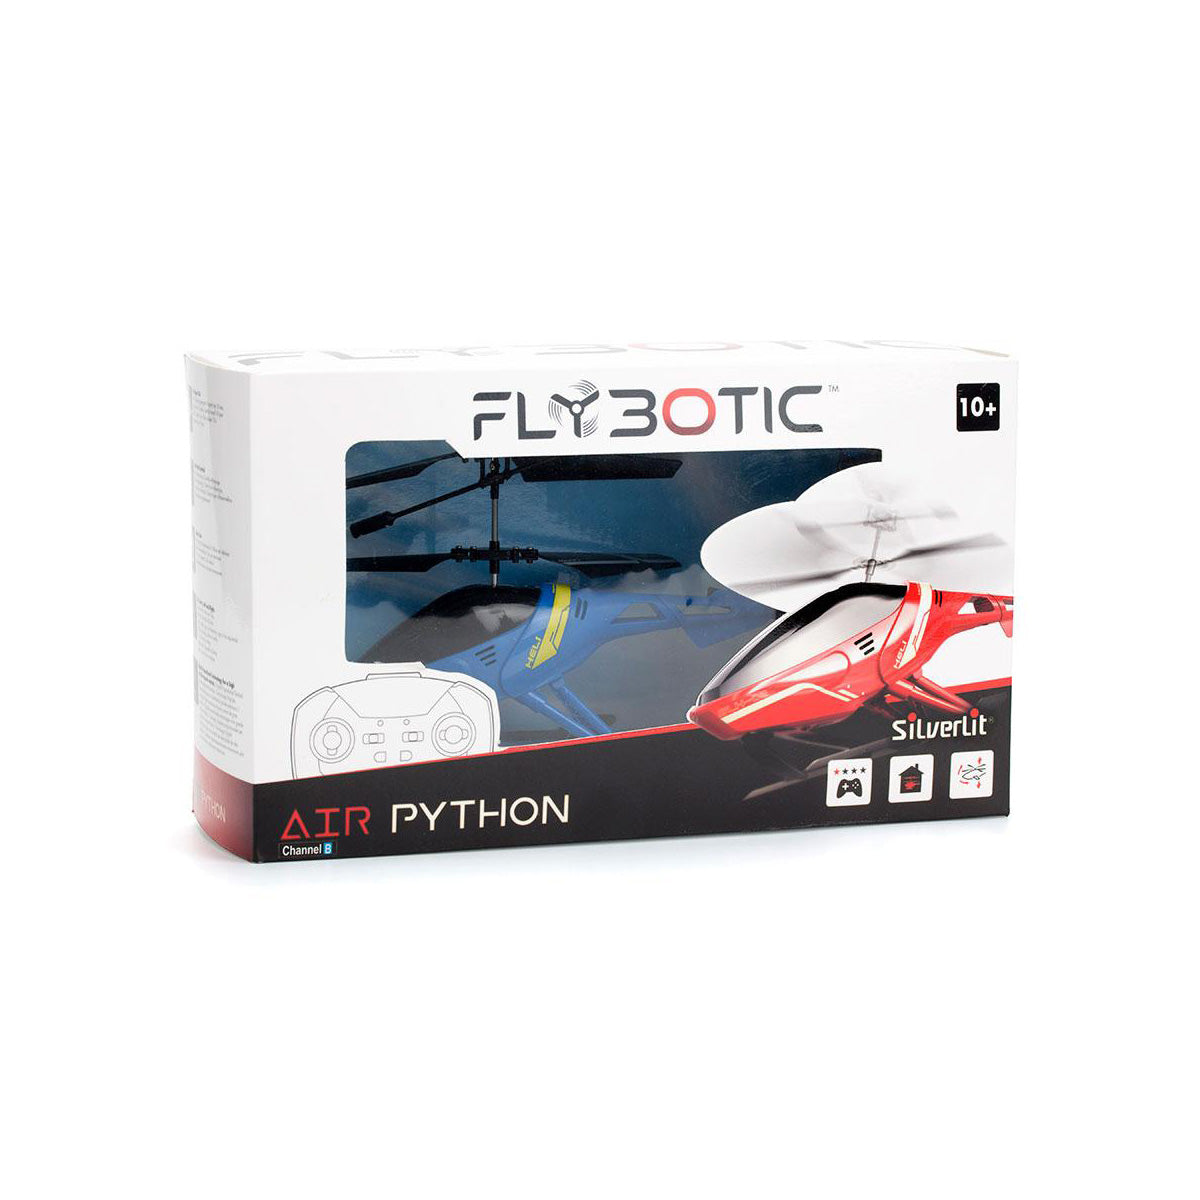 Silverlit Air Python Beginner RC Helicopter - Assorted Colors - Hobbytech Toys